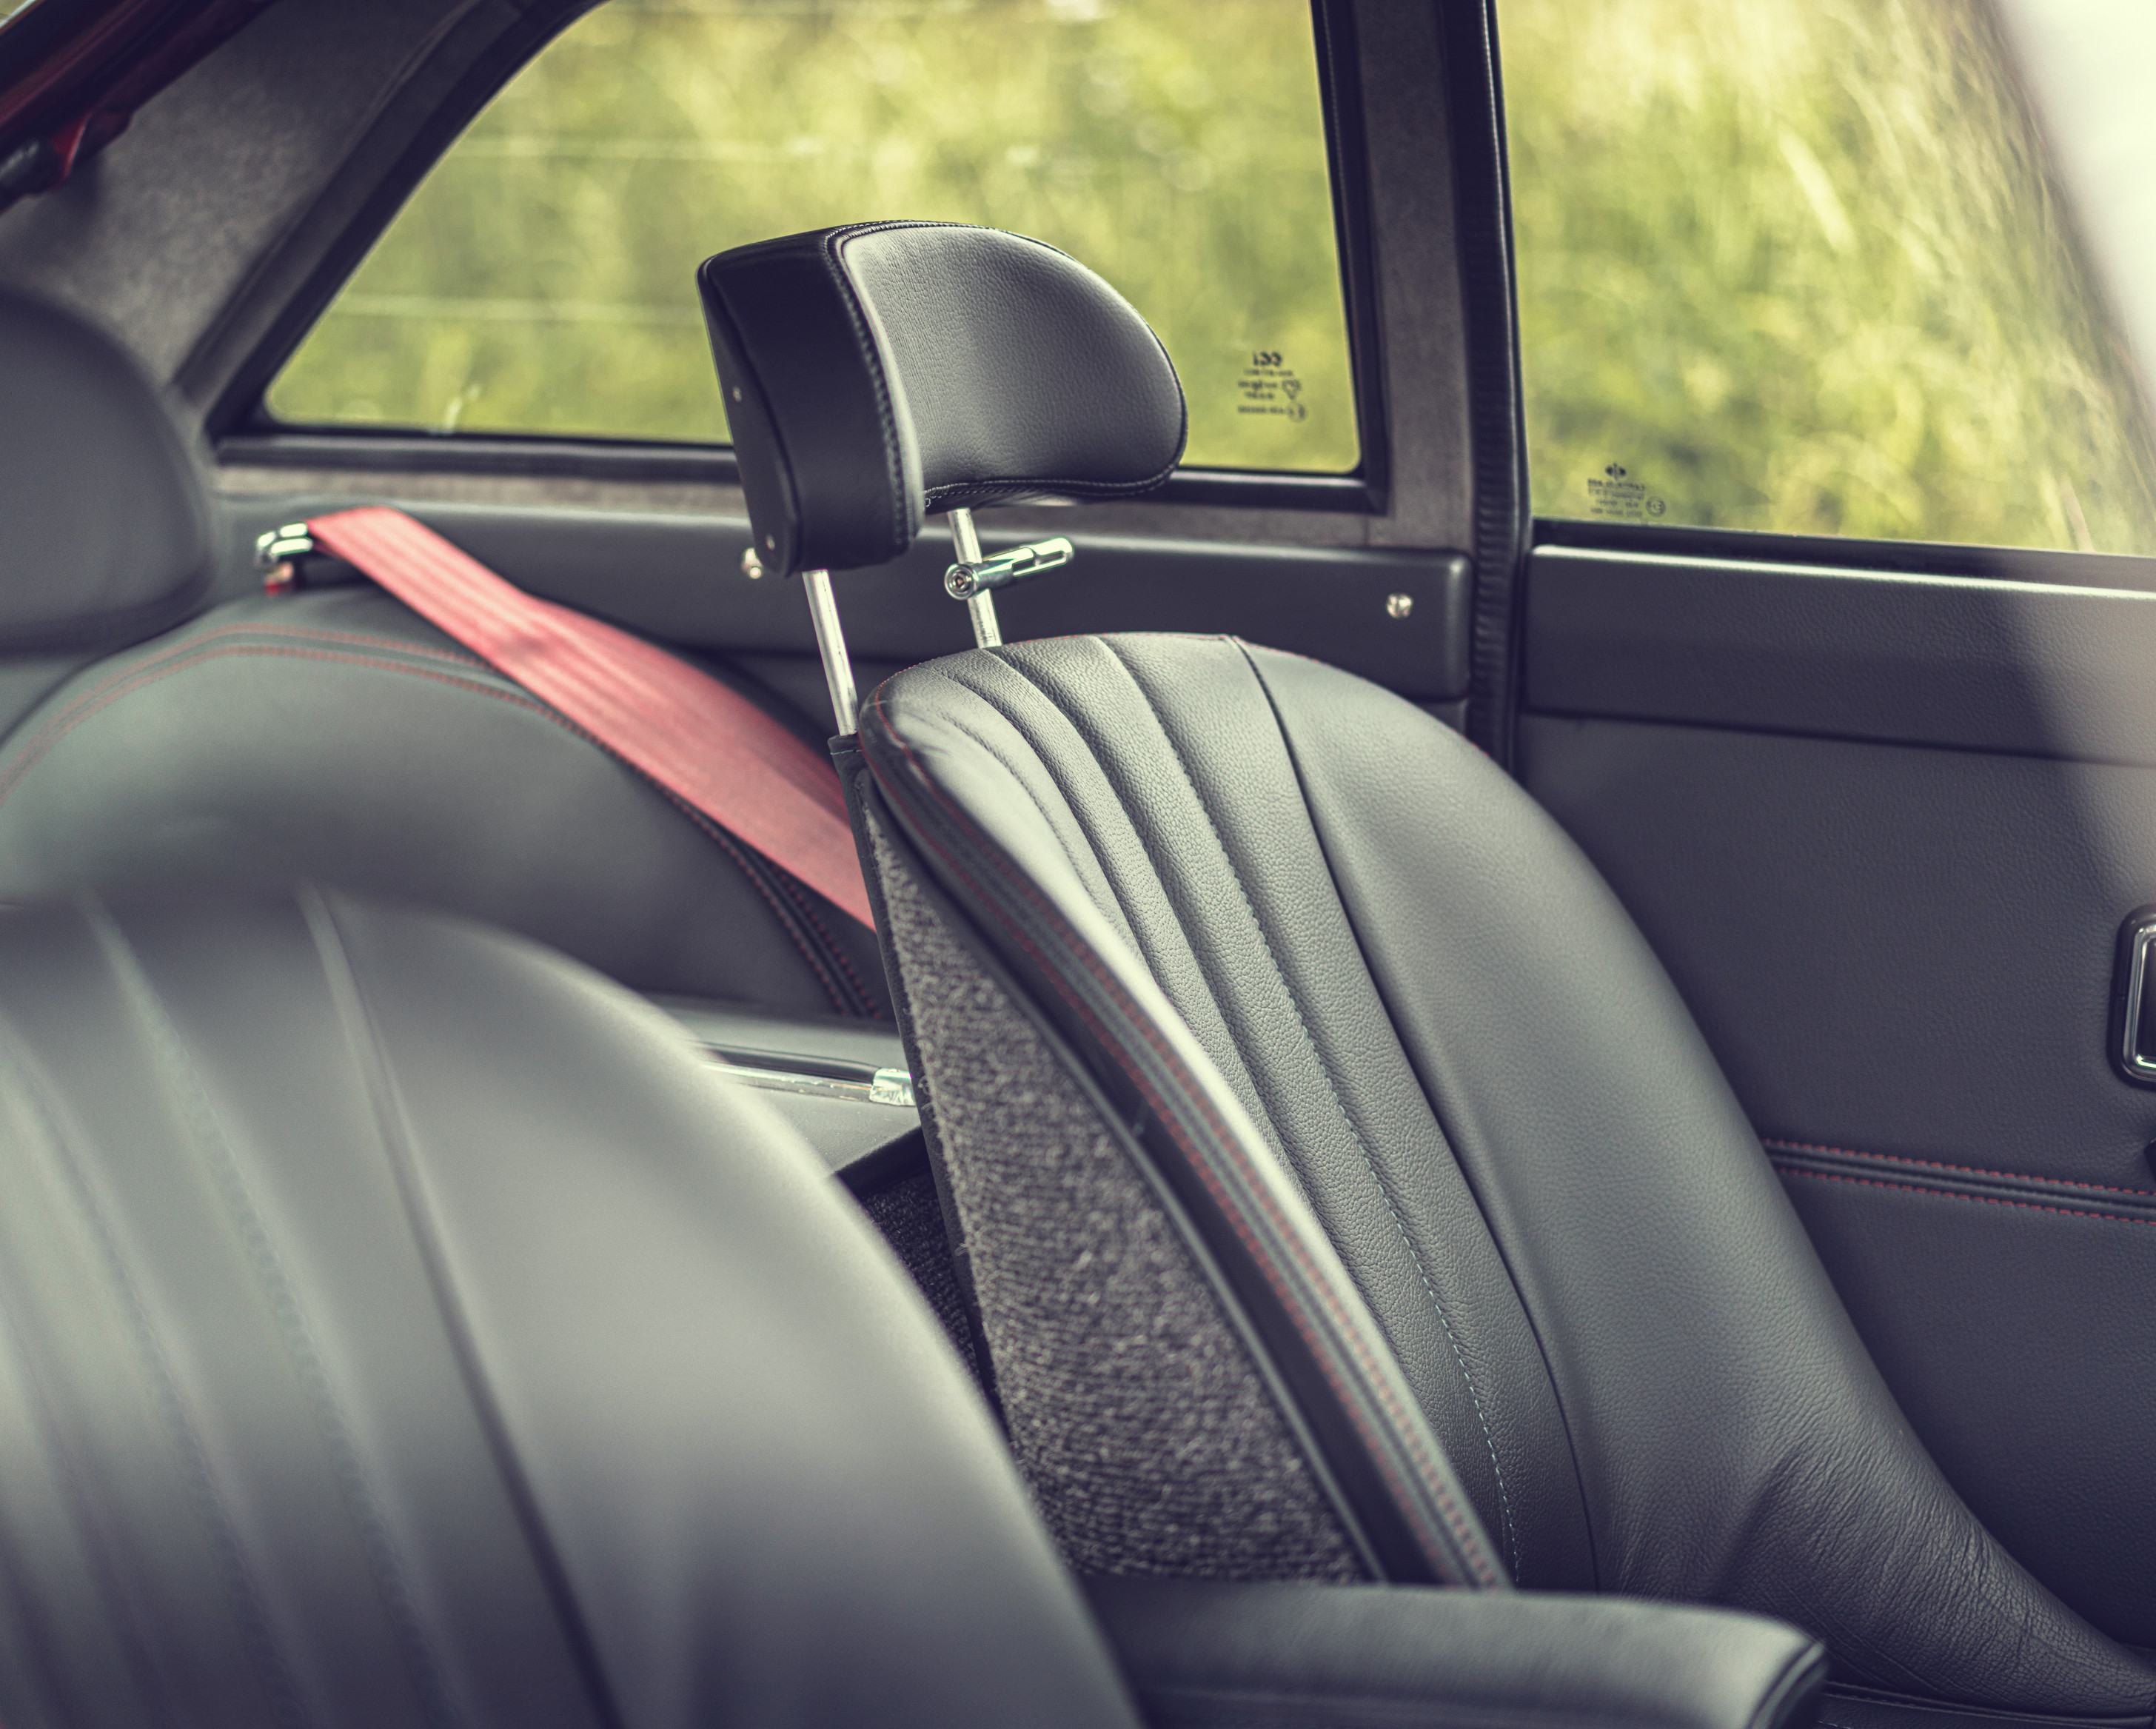 High-performance seats and unique headrests give great support